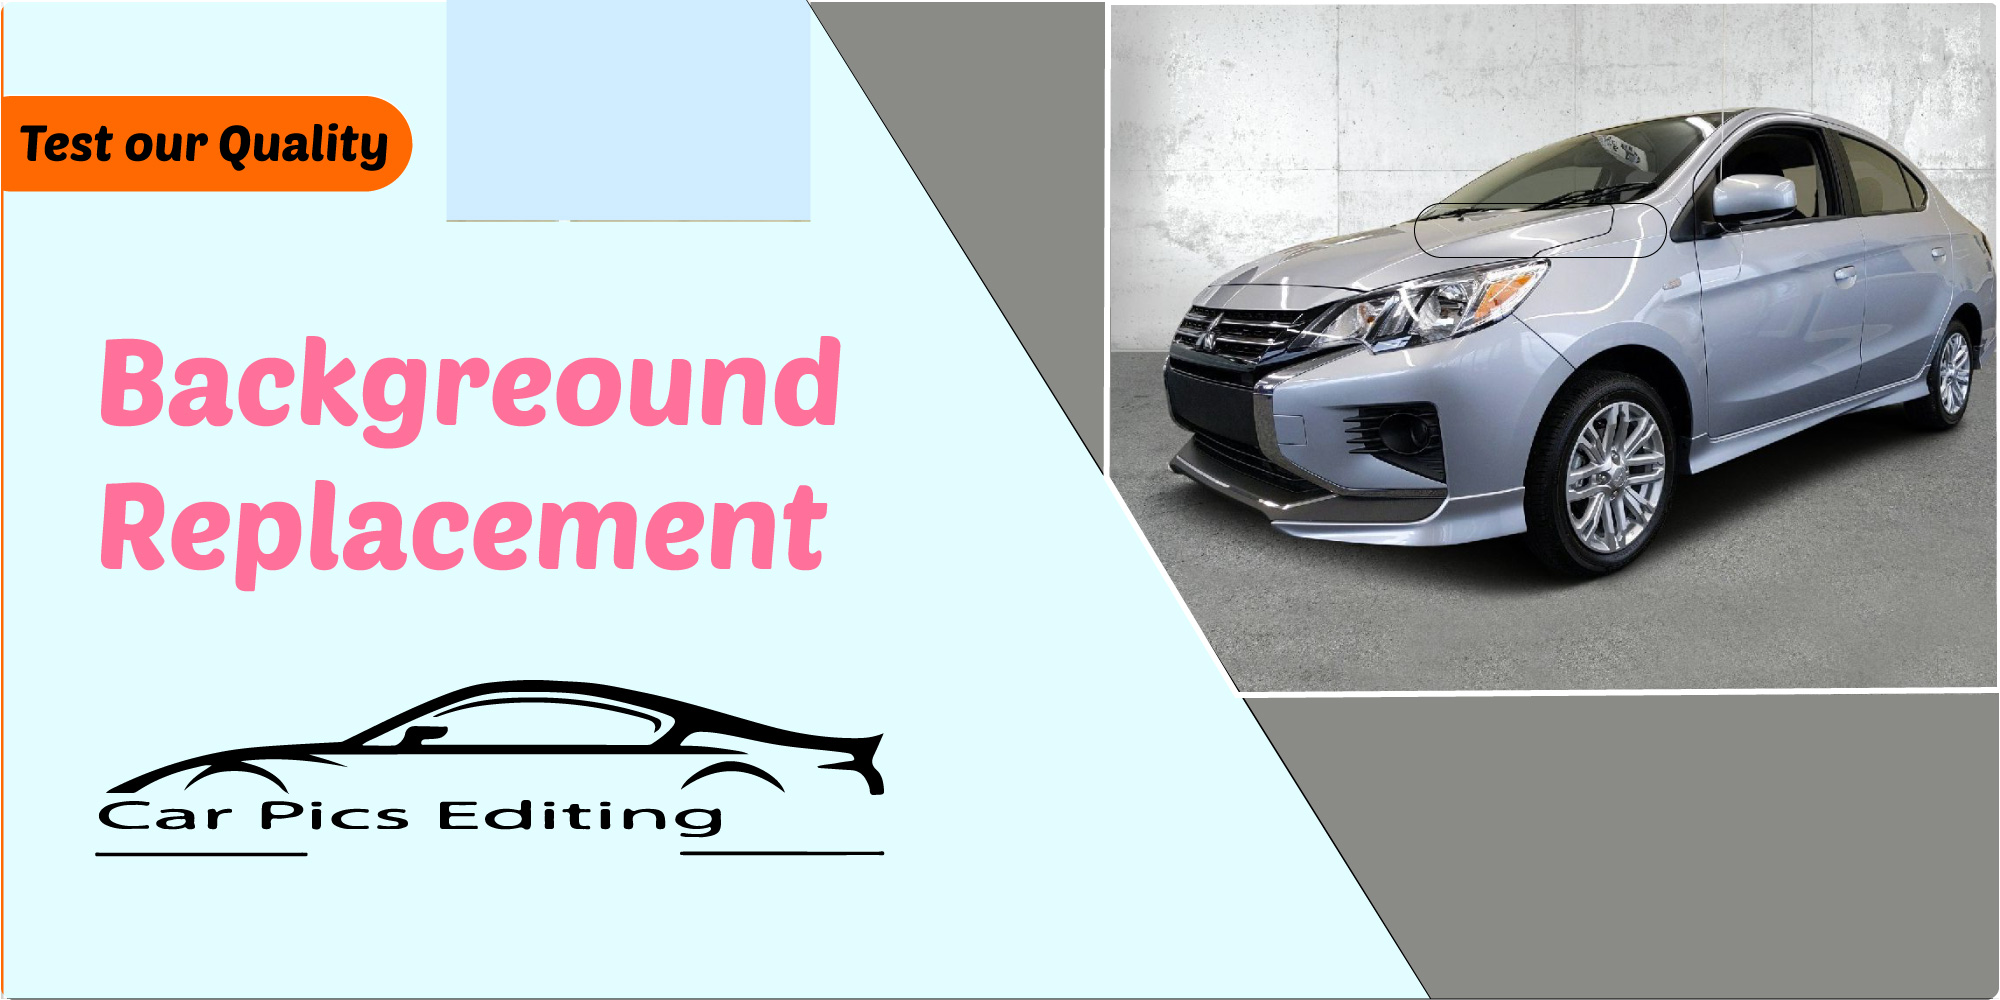 Most Well Guarded Secrets about Automotive Background Replacement 3